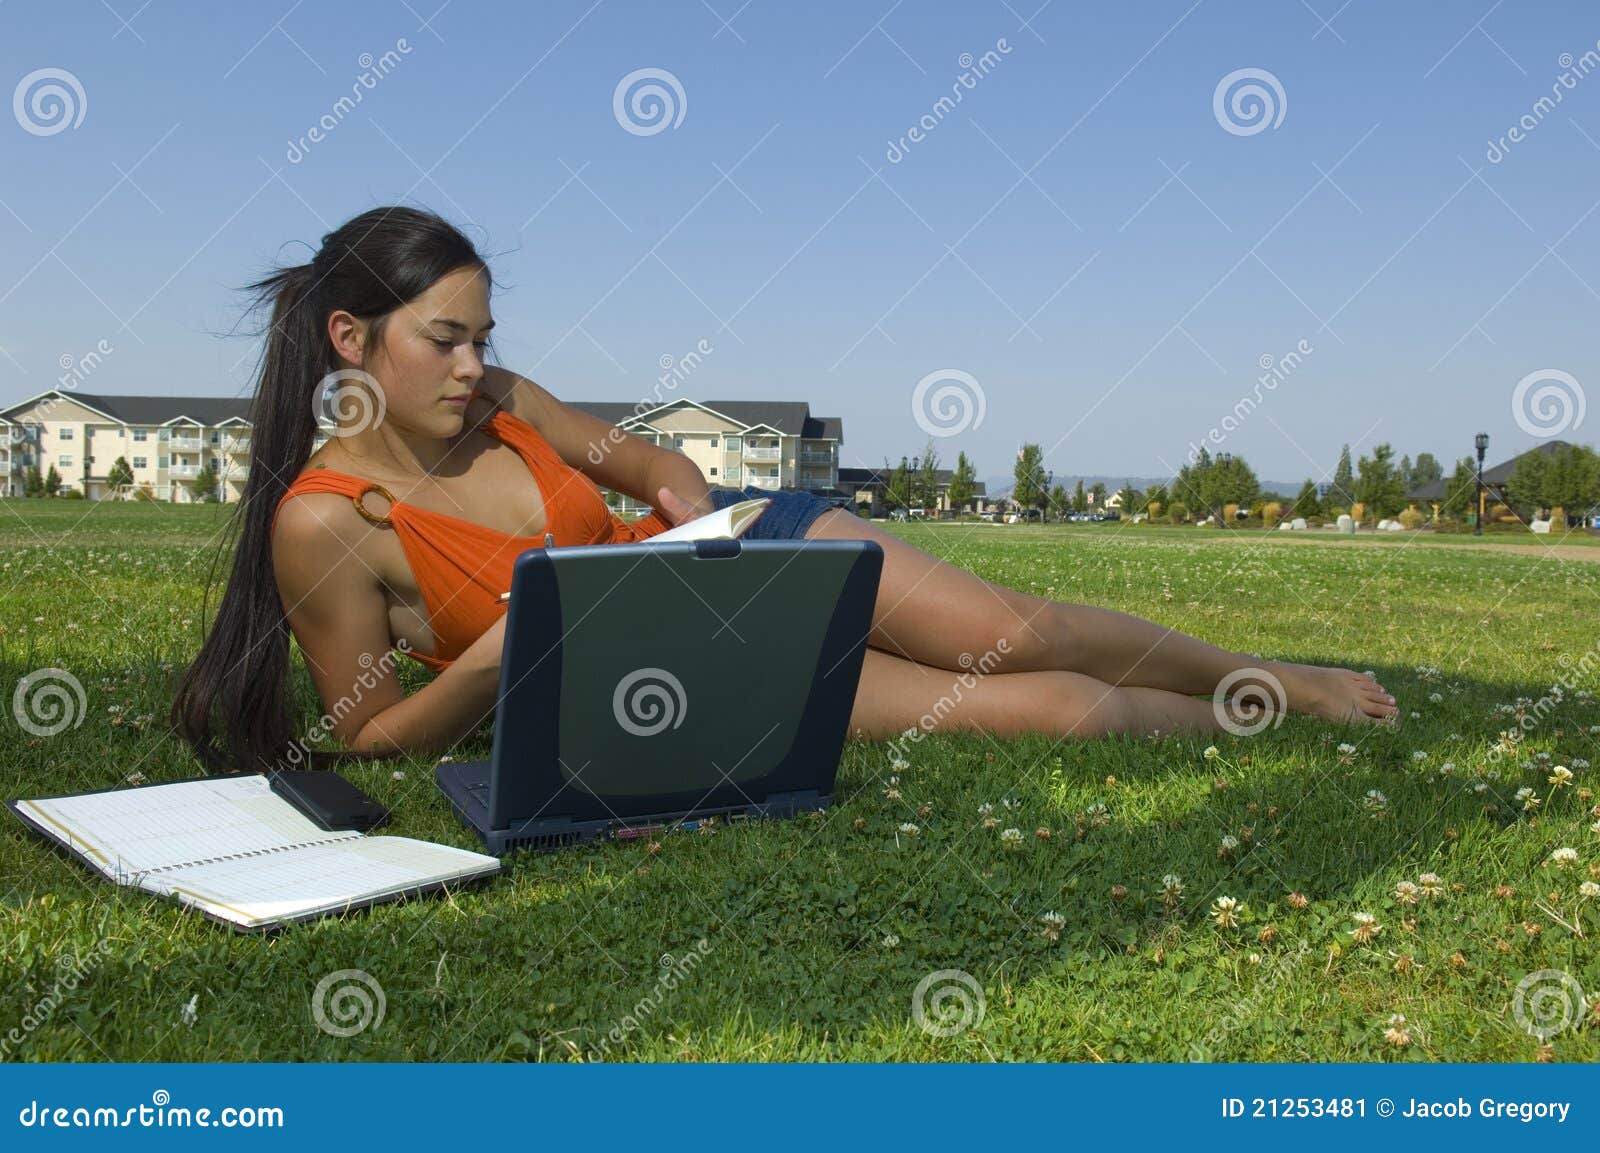  - college-student-studying-park-21253481